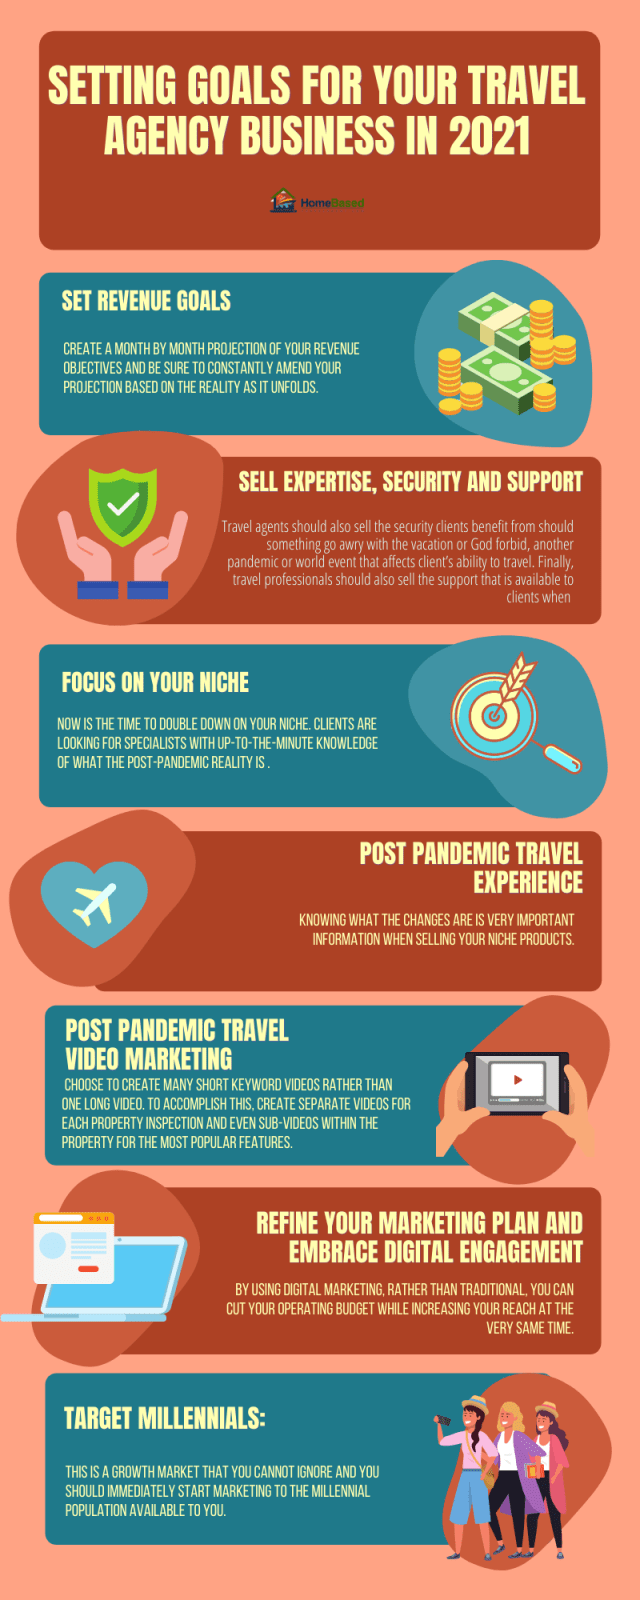 Setting Goals for Your Home Based Travel Agency Business in 2021 Infographic